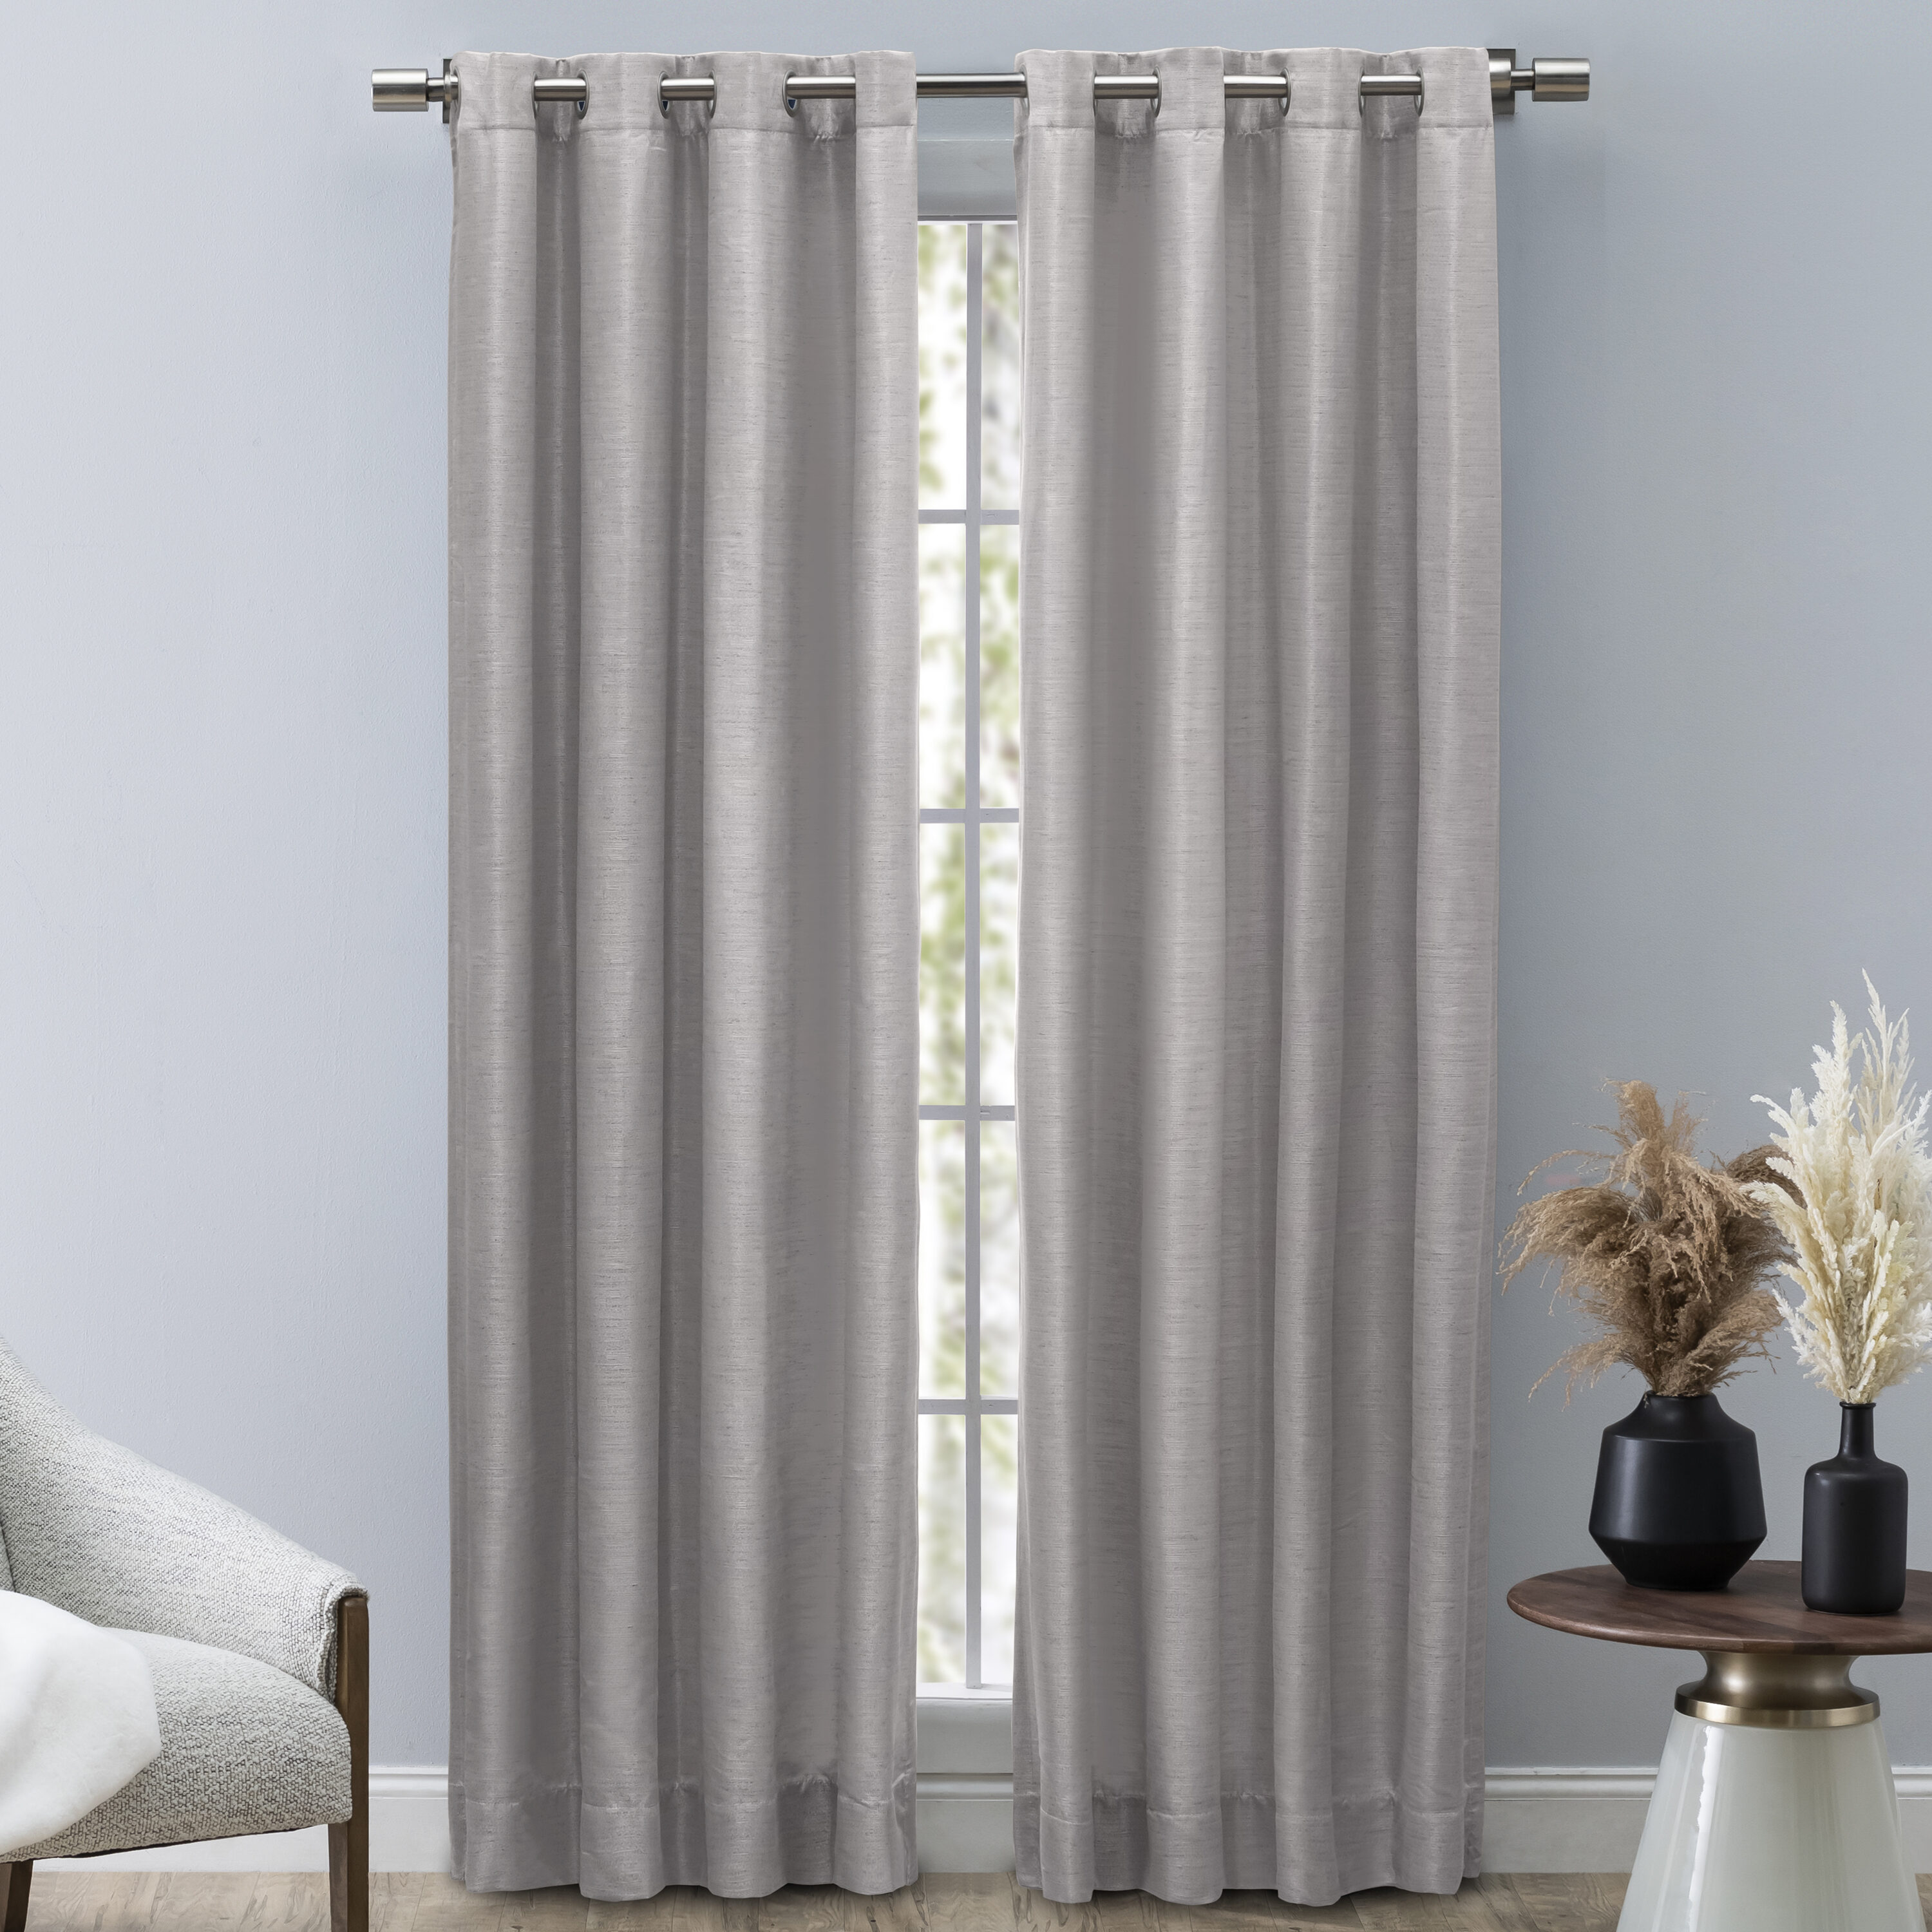  StangH Thick Velvet Curtains 96-inch - Heavy-Duty